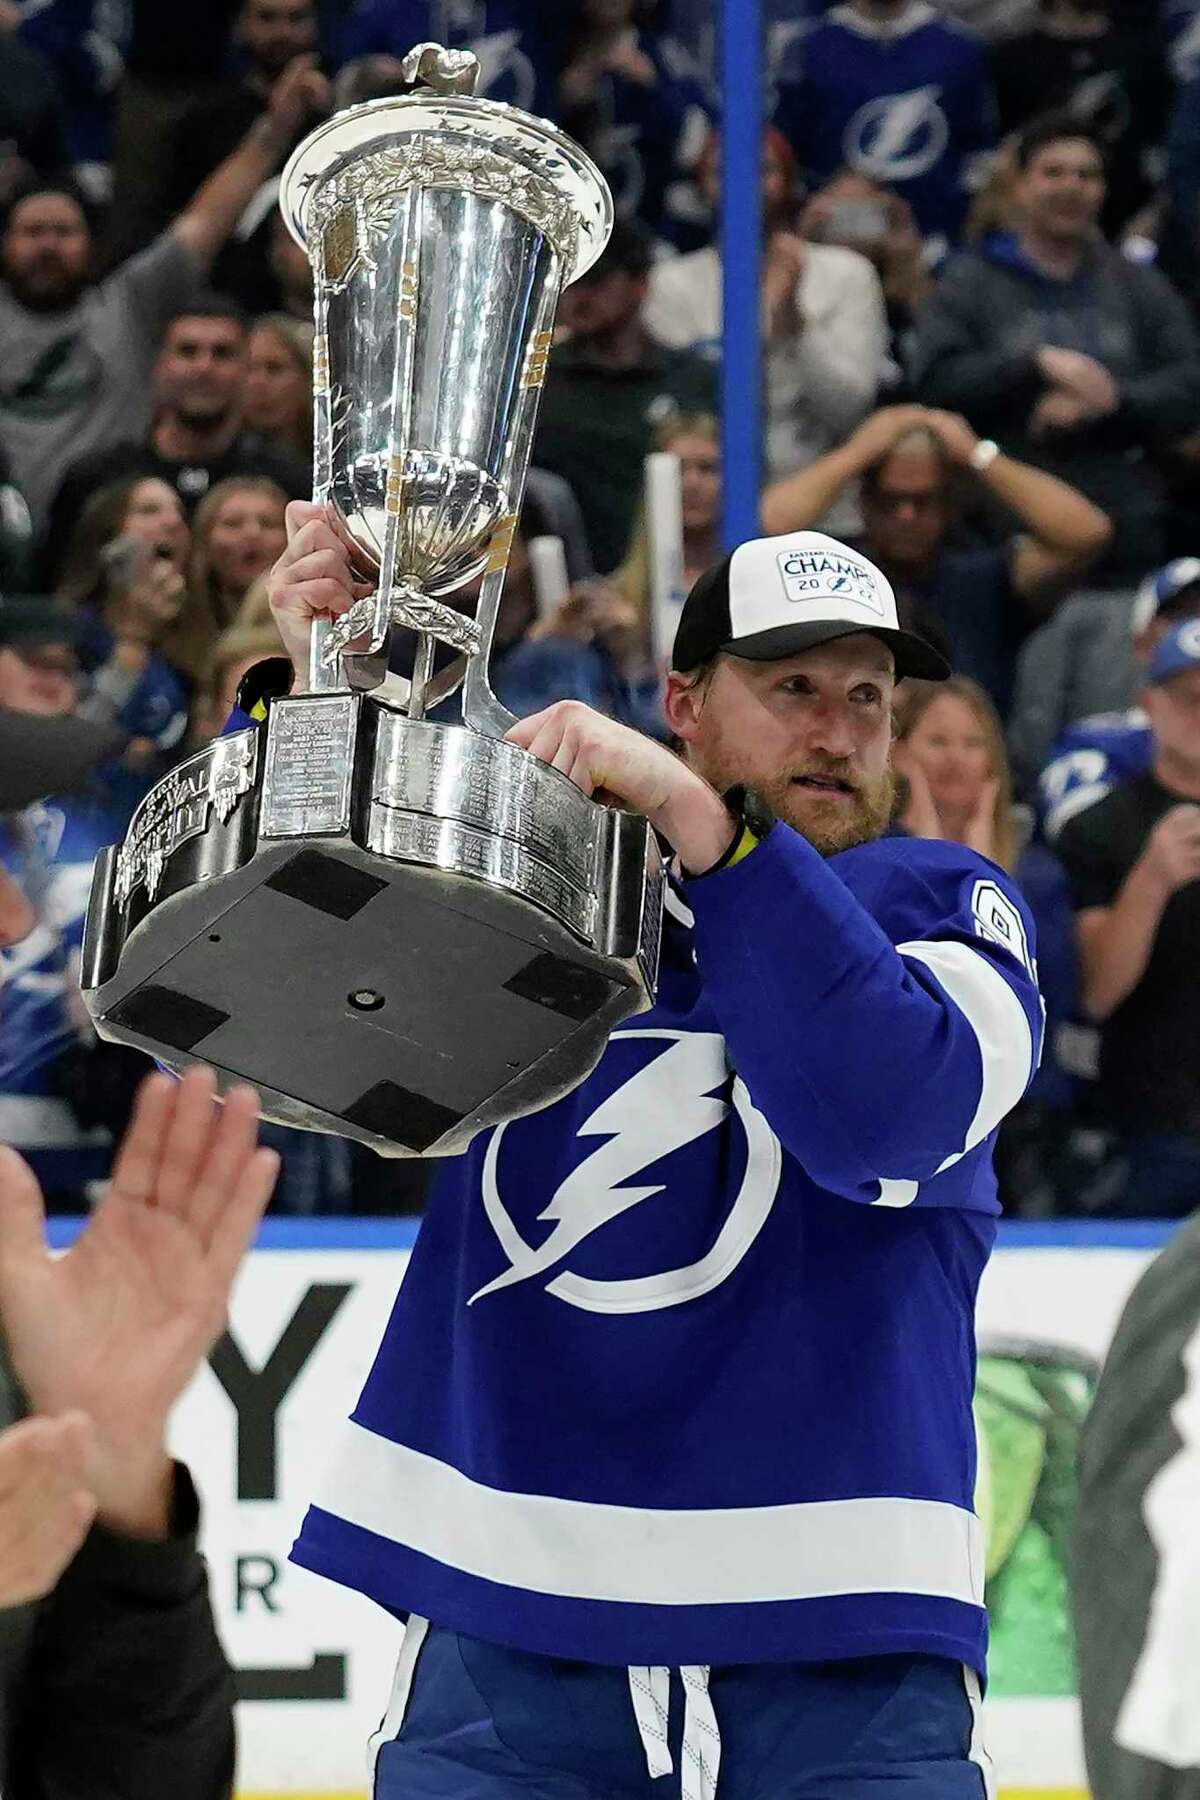 Tampa Bay Lightning center Steven Stamkos (91) holds up the Prince of Wales trophy after the team defeated the New York Rangers during Game 6 of the NHL hockey Stanley Cup playoffs Eastern Conference finals Saturday, June 11, 2022, in Tampa, Fla. The Lightning advanced to the Stanley Cup Finals. (AP Photo/Chris O'Meara)